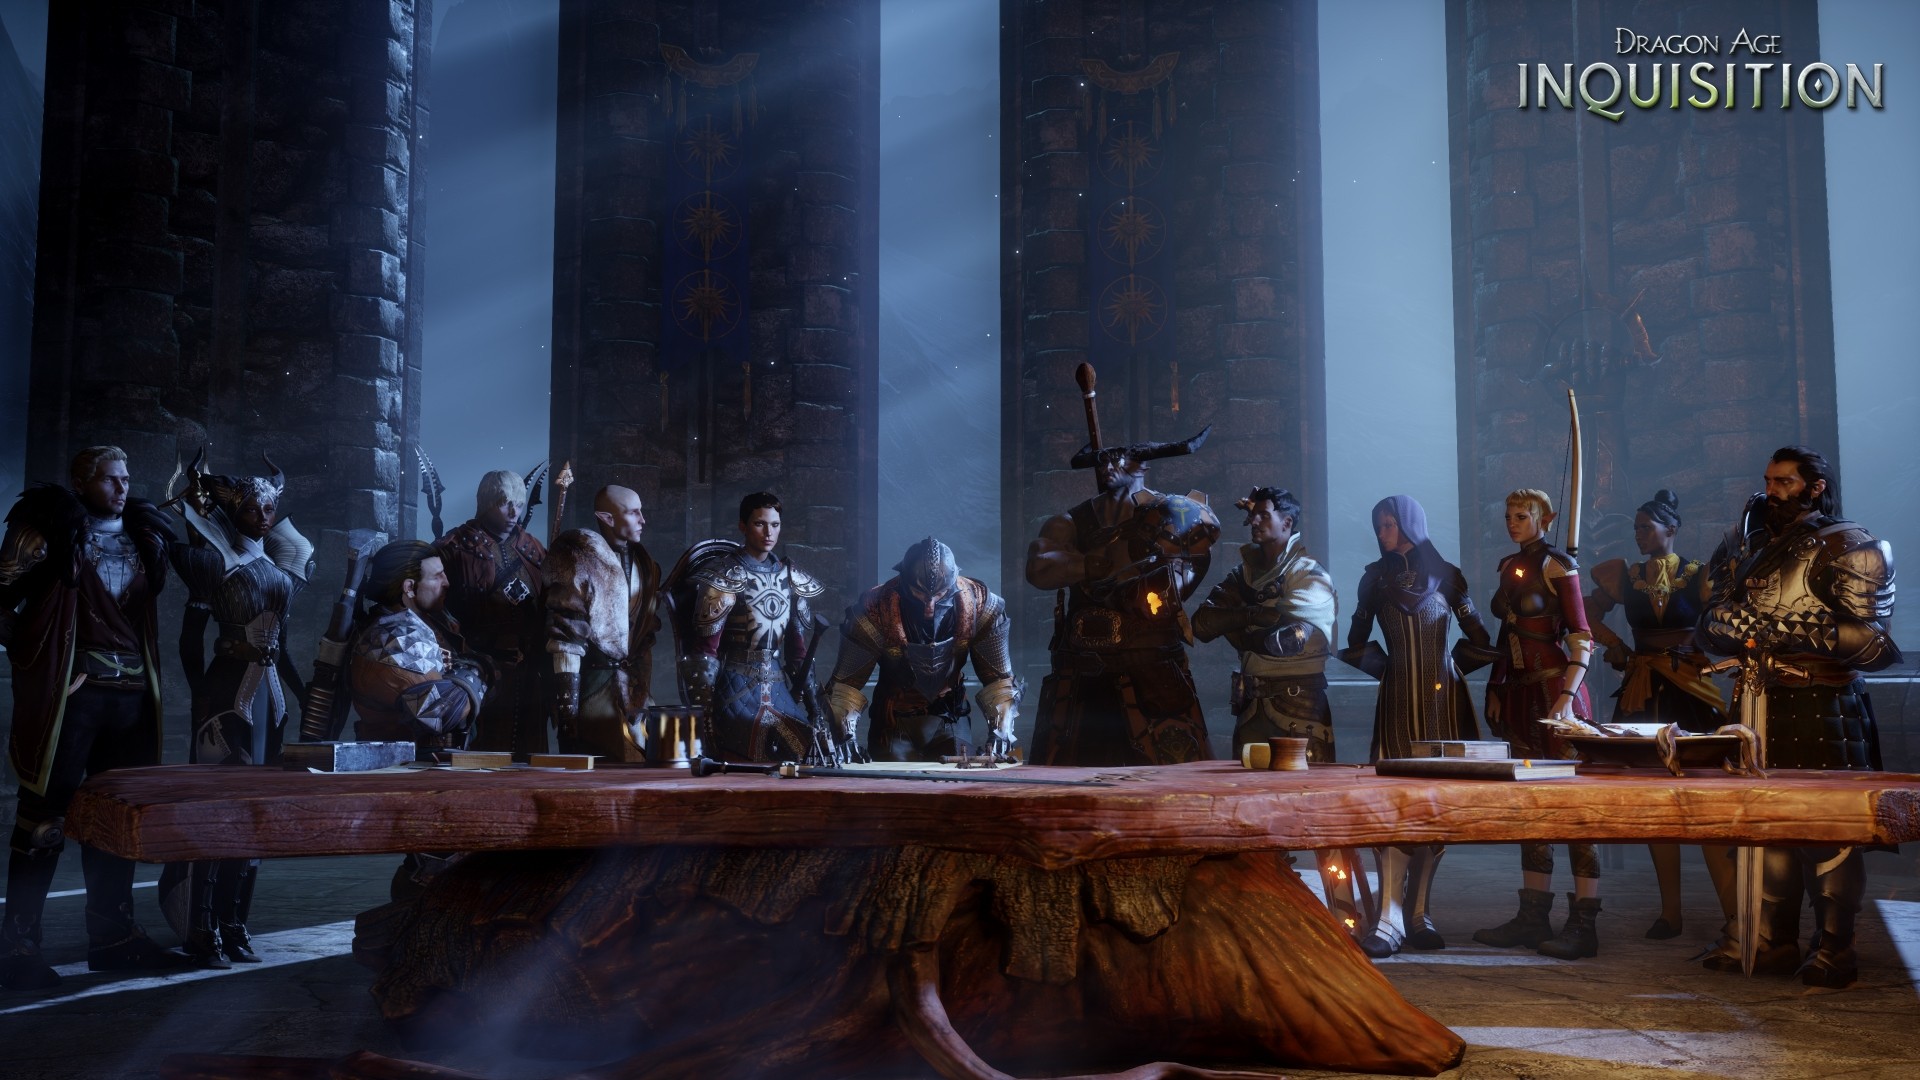  Dragon Age Inquisition - Standard Edition - PC : Movies & TV